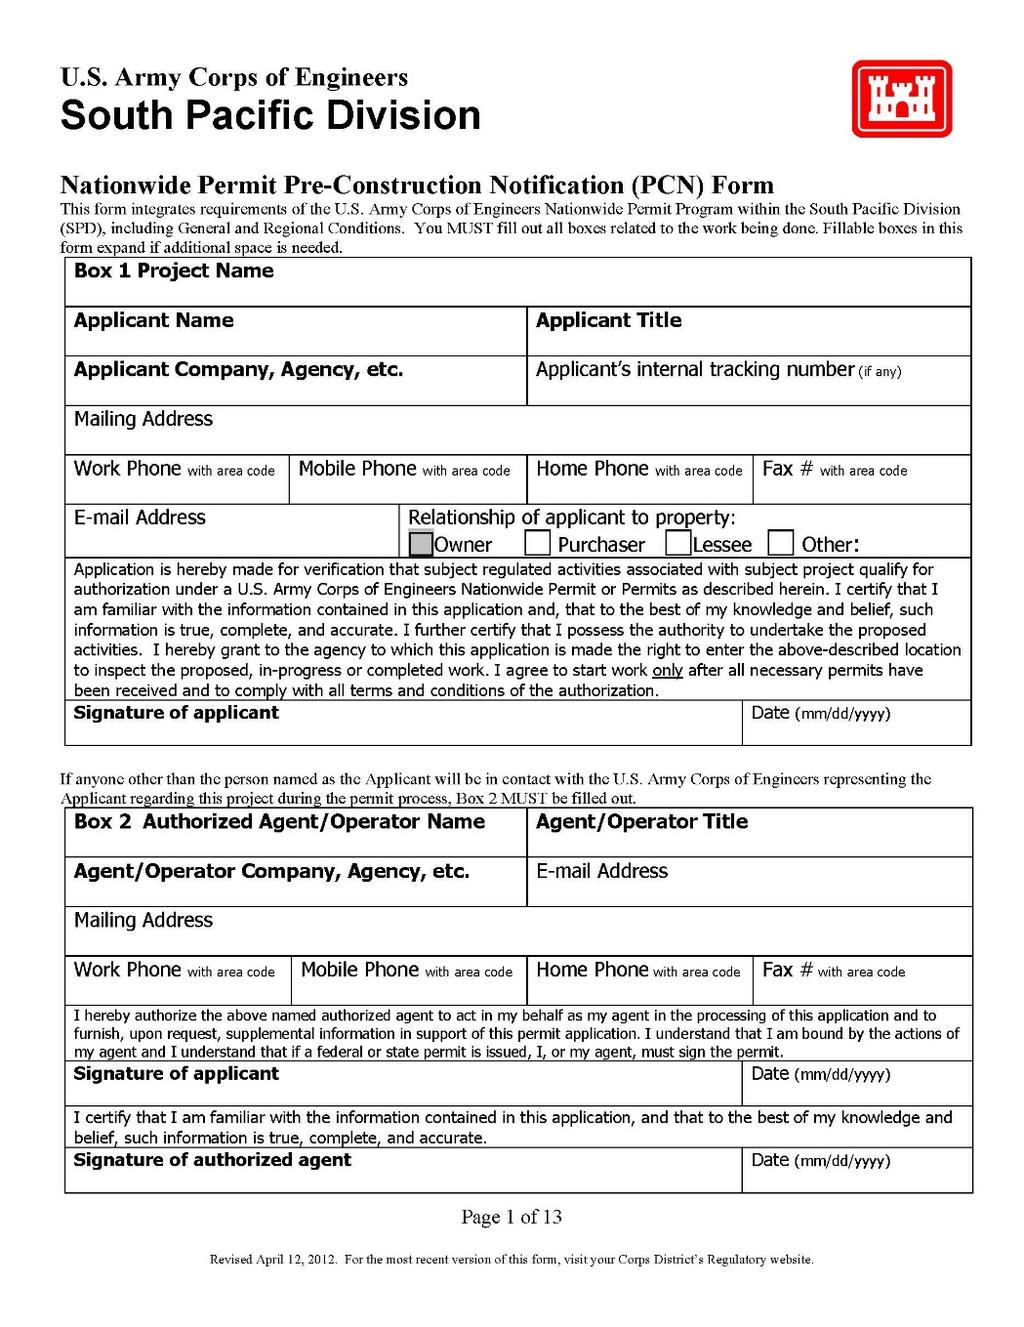 NWP PCN Form As